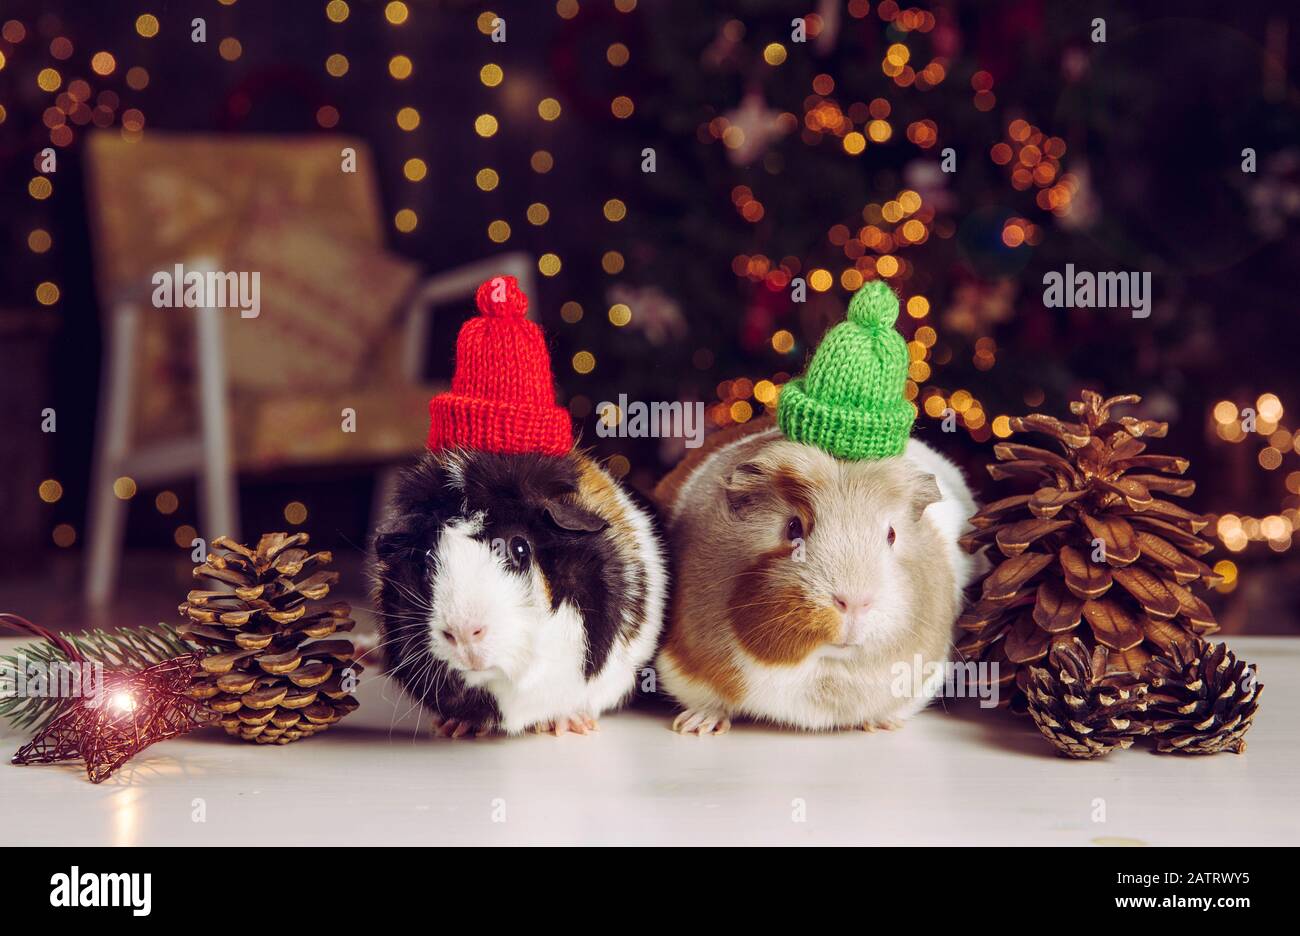 Two cute little Domestic guinea pigs (Cavia porcellus), also known as cavy or domestic cavy on Christmas lights background indoors in winter. Wearing Stock Photo